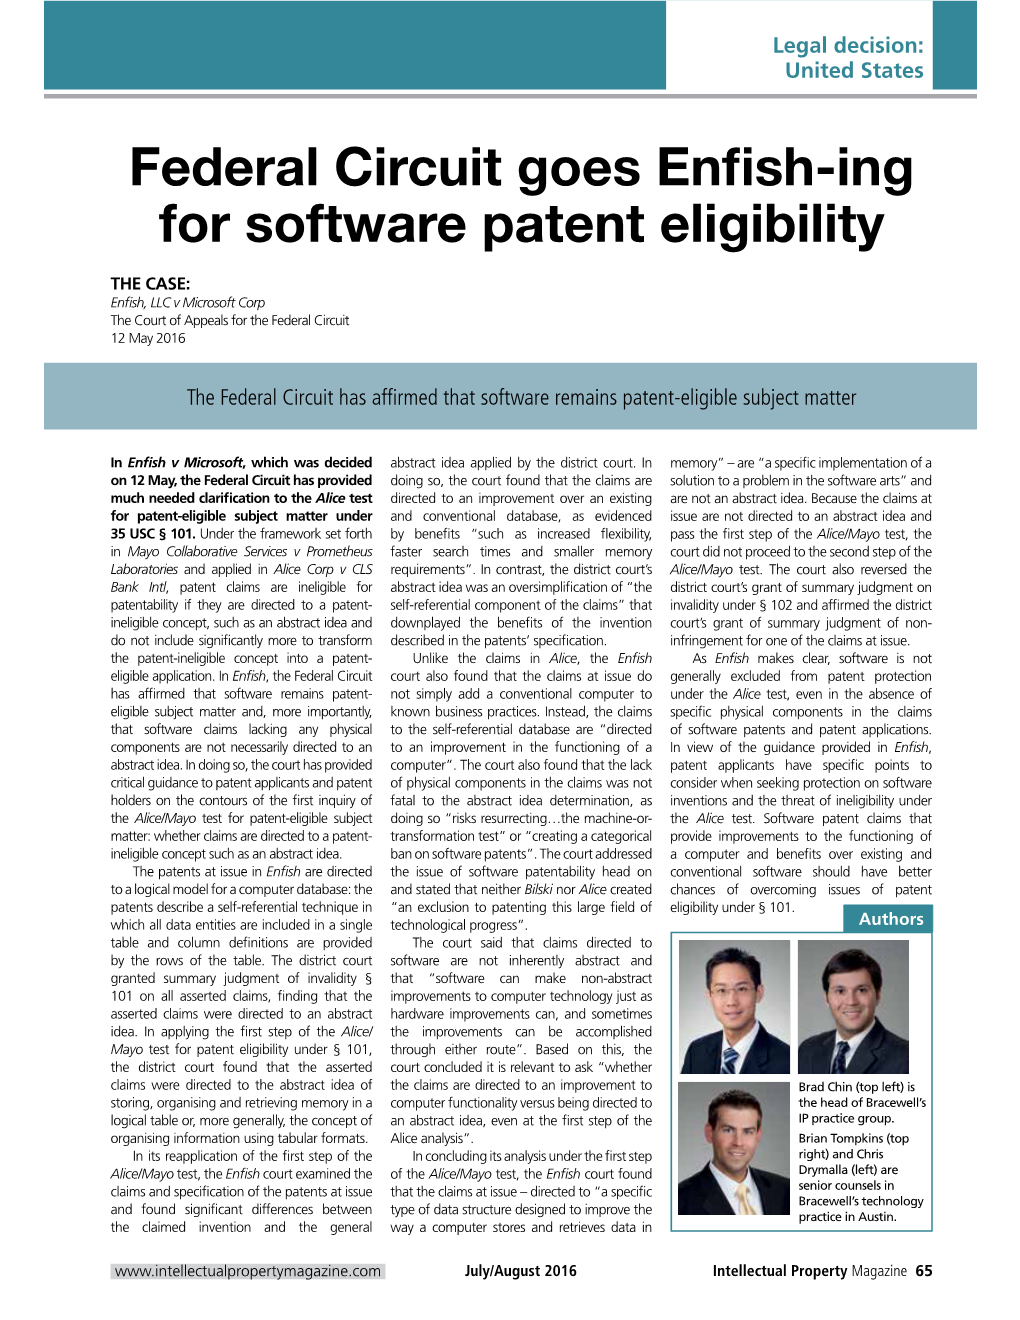 Federal Circuit Goes Enfish-Ing for Software Patent Eligibility